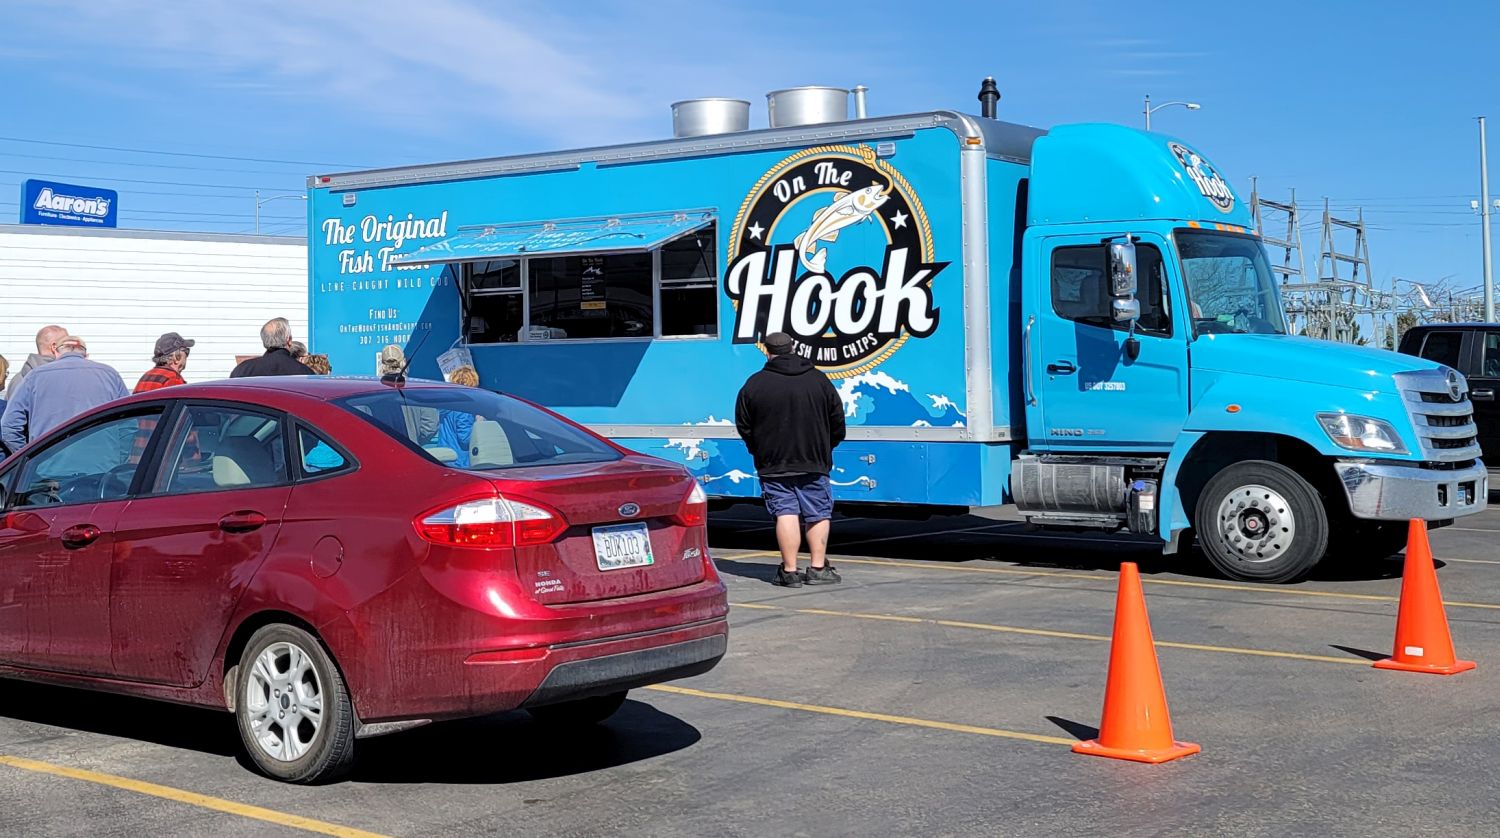 On The Hook food truck in Great Falls